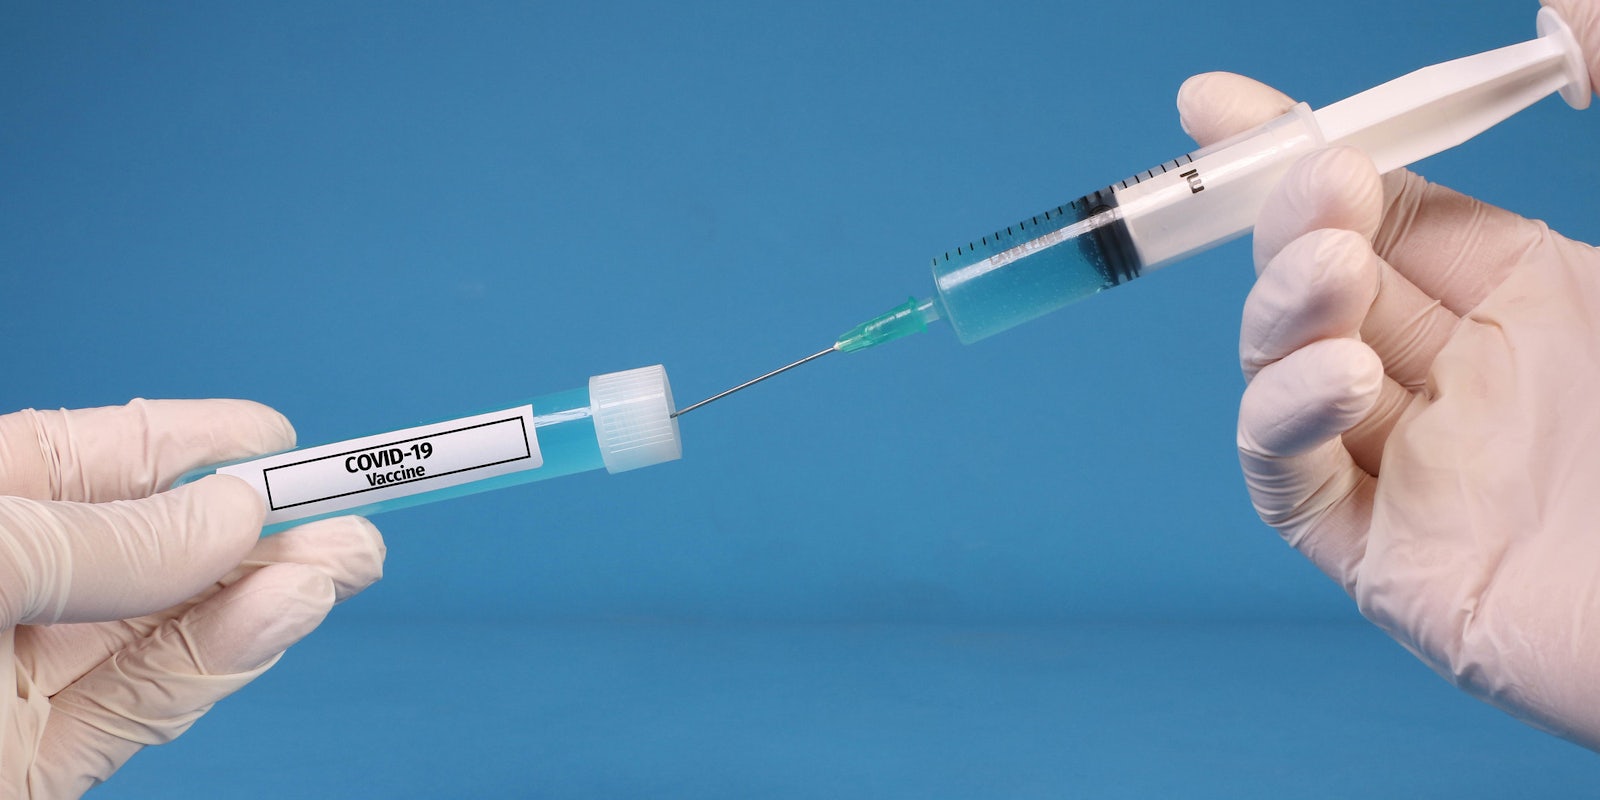 The COVID-19 vaccine being put into a syringe.